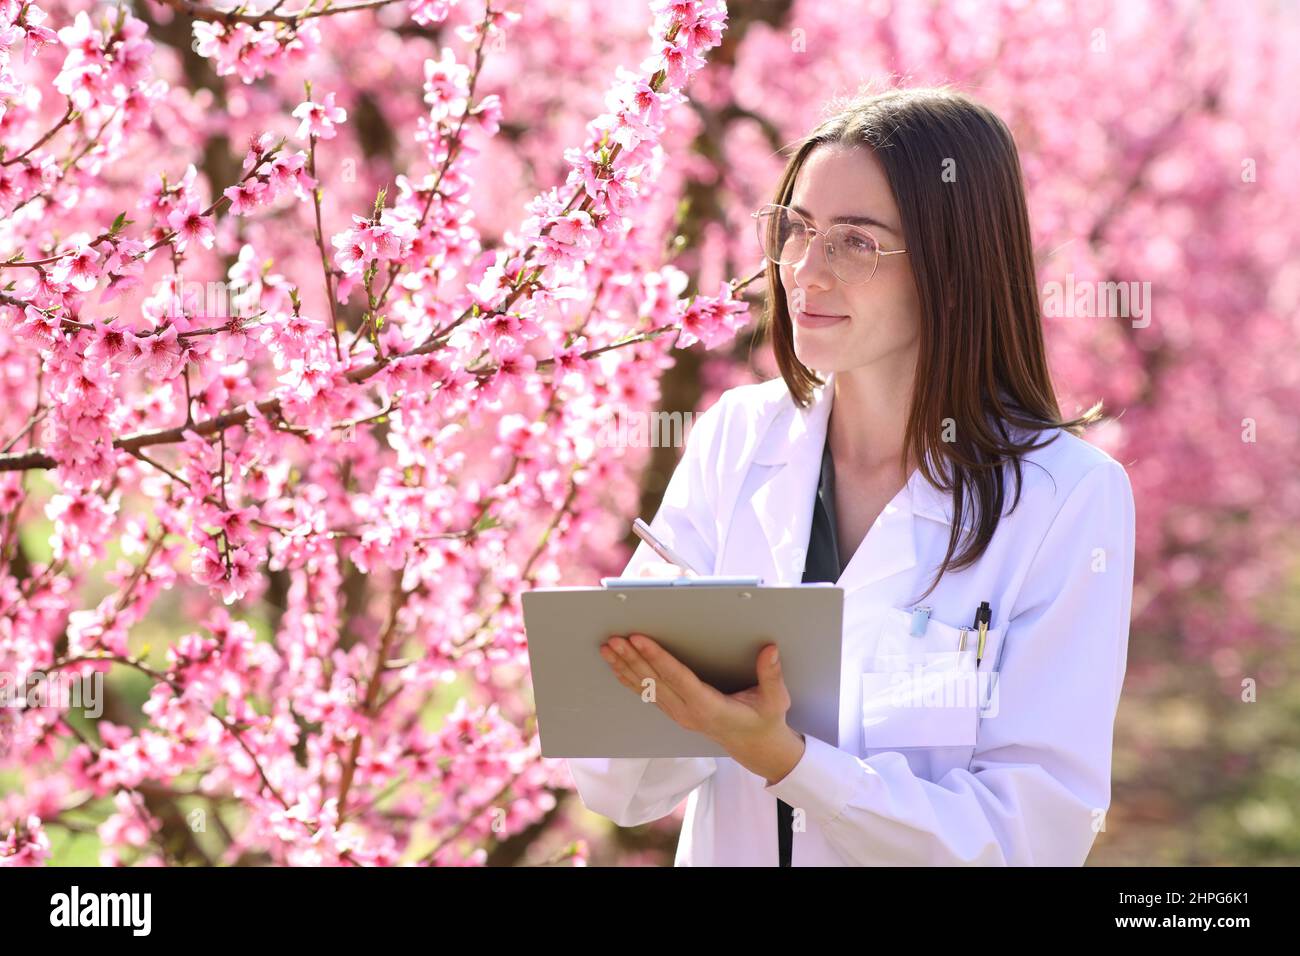 Beautiful biologist checking flowers in a peach trees field Stock Photo